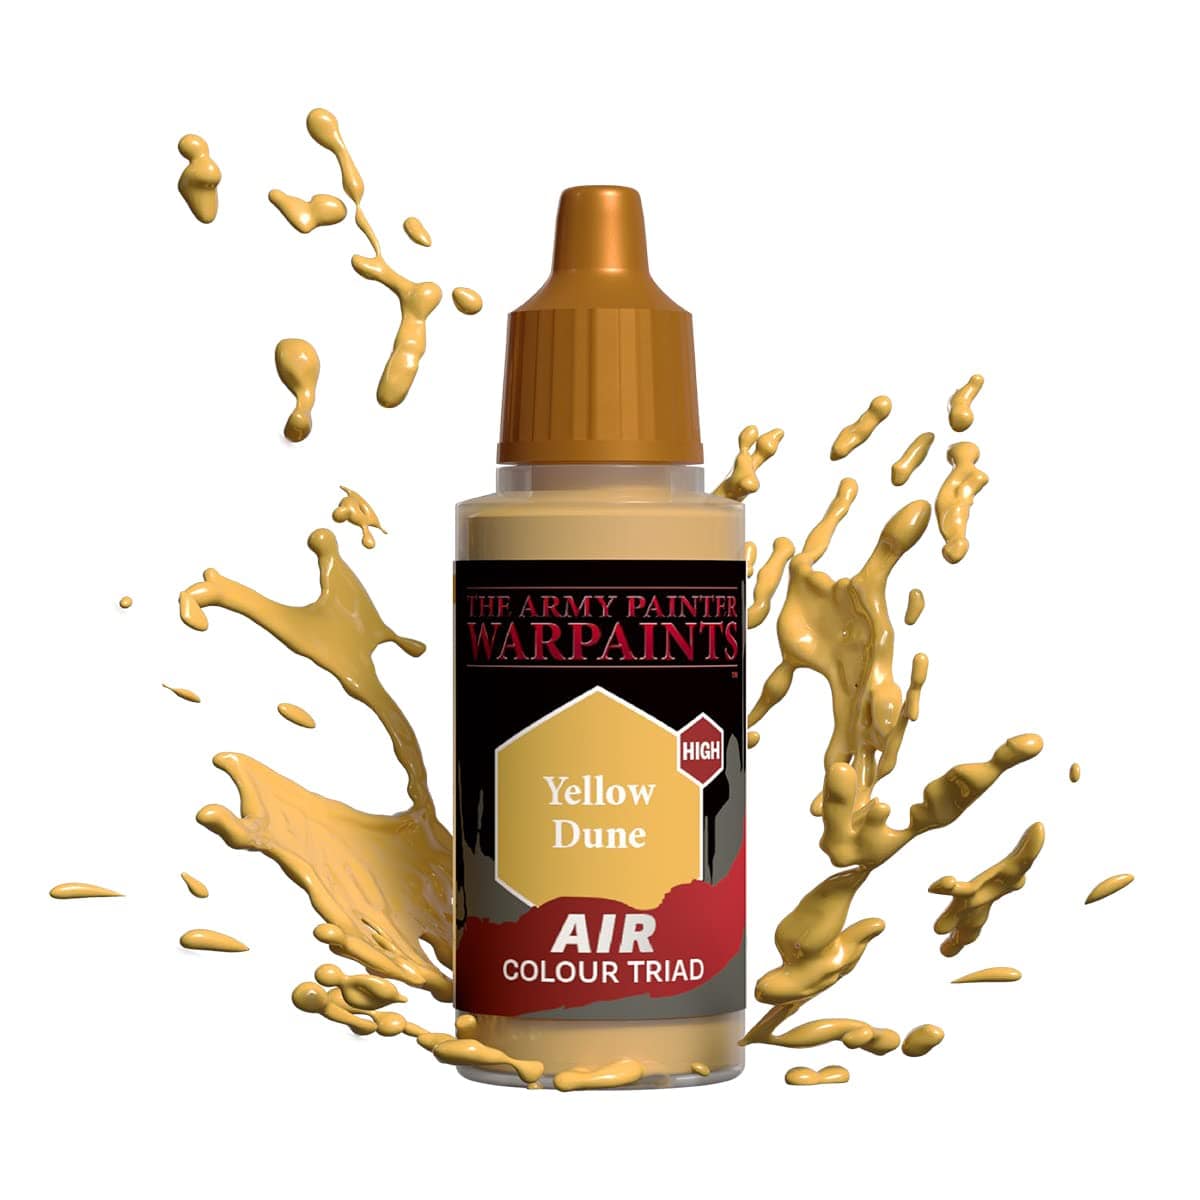 The Army Painter Accessories The Army Painter Warpaints Air: Yellow Dune 18ml